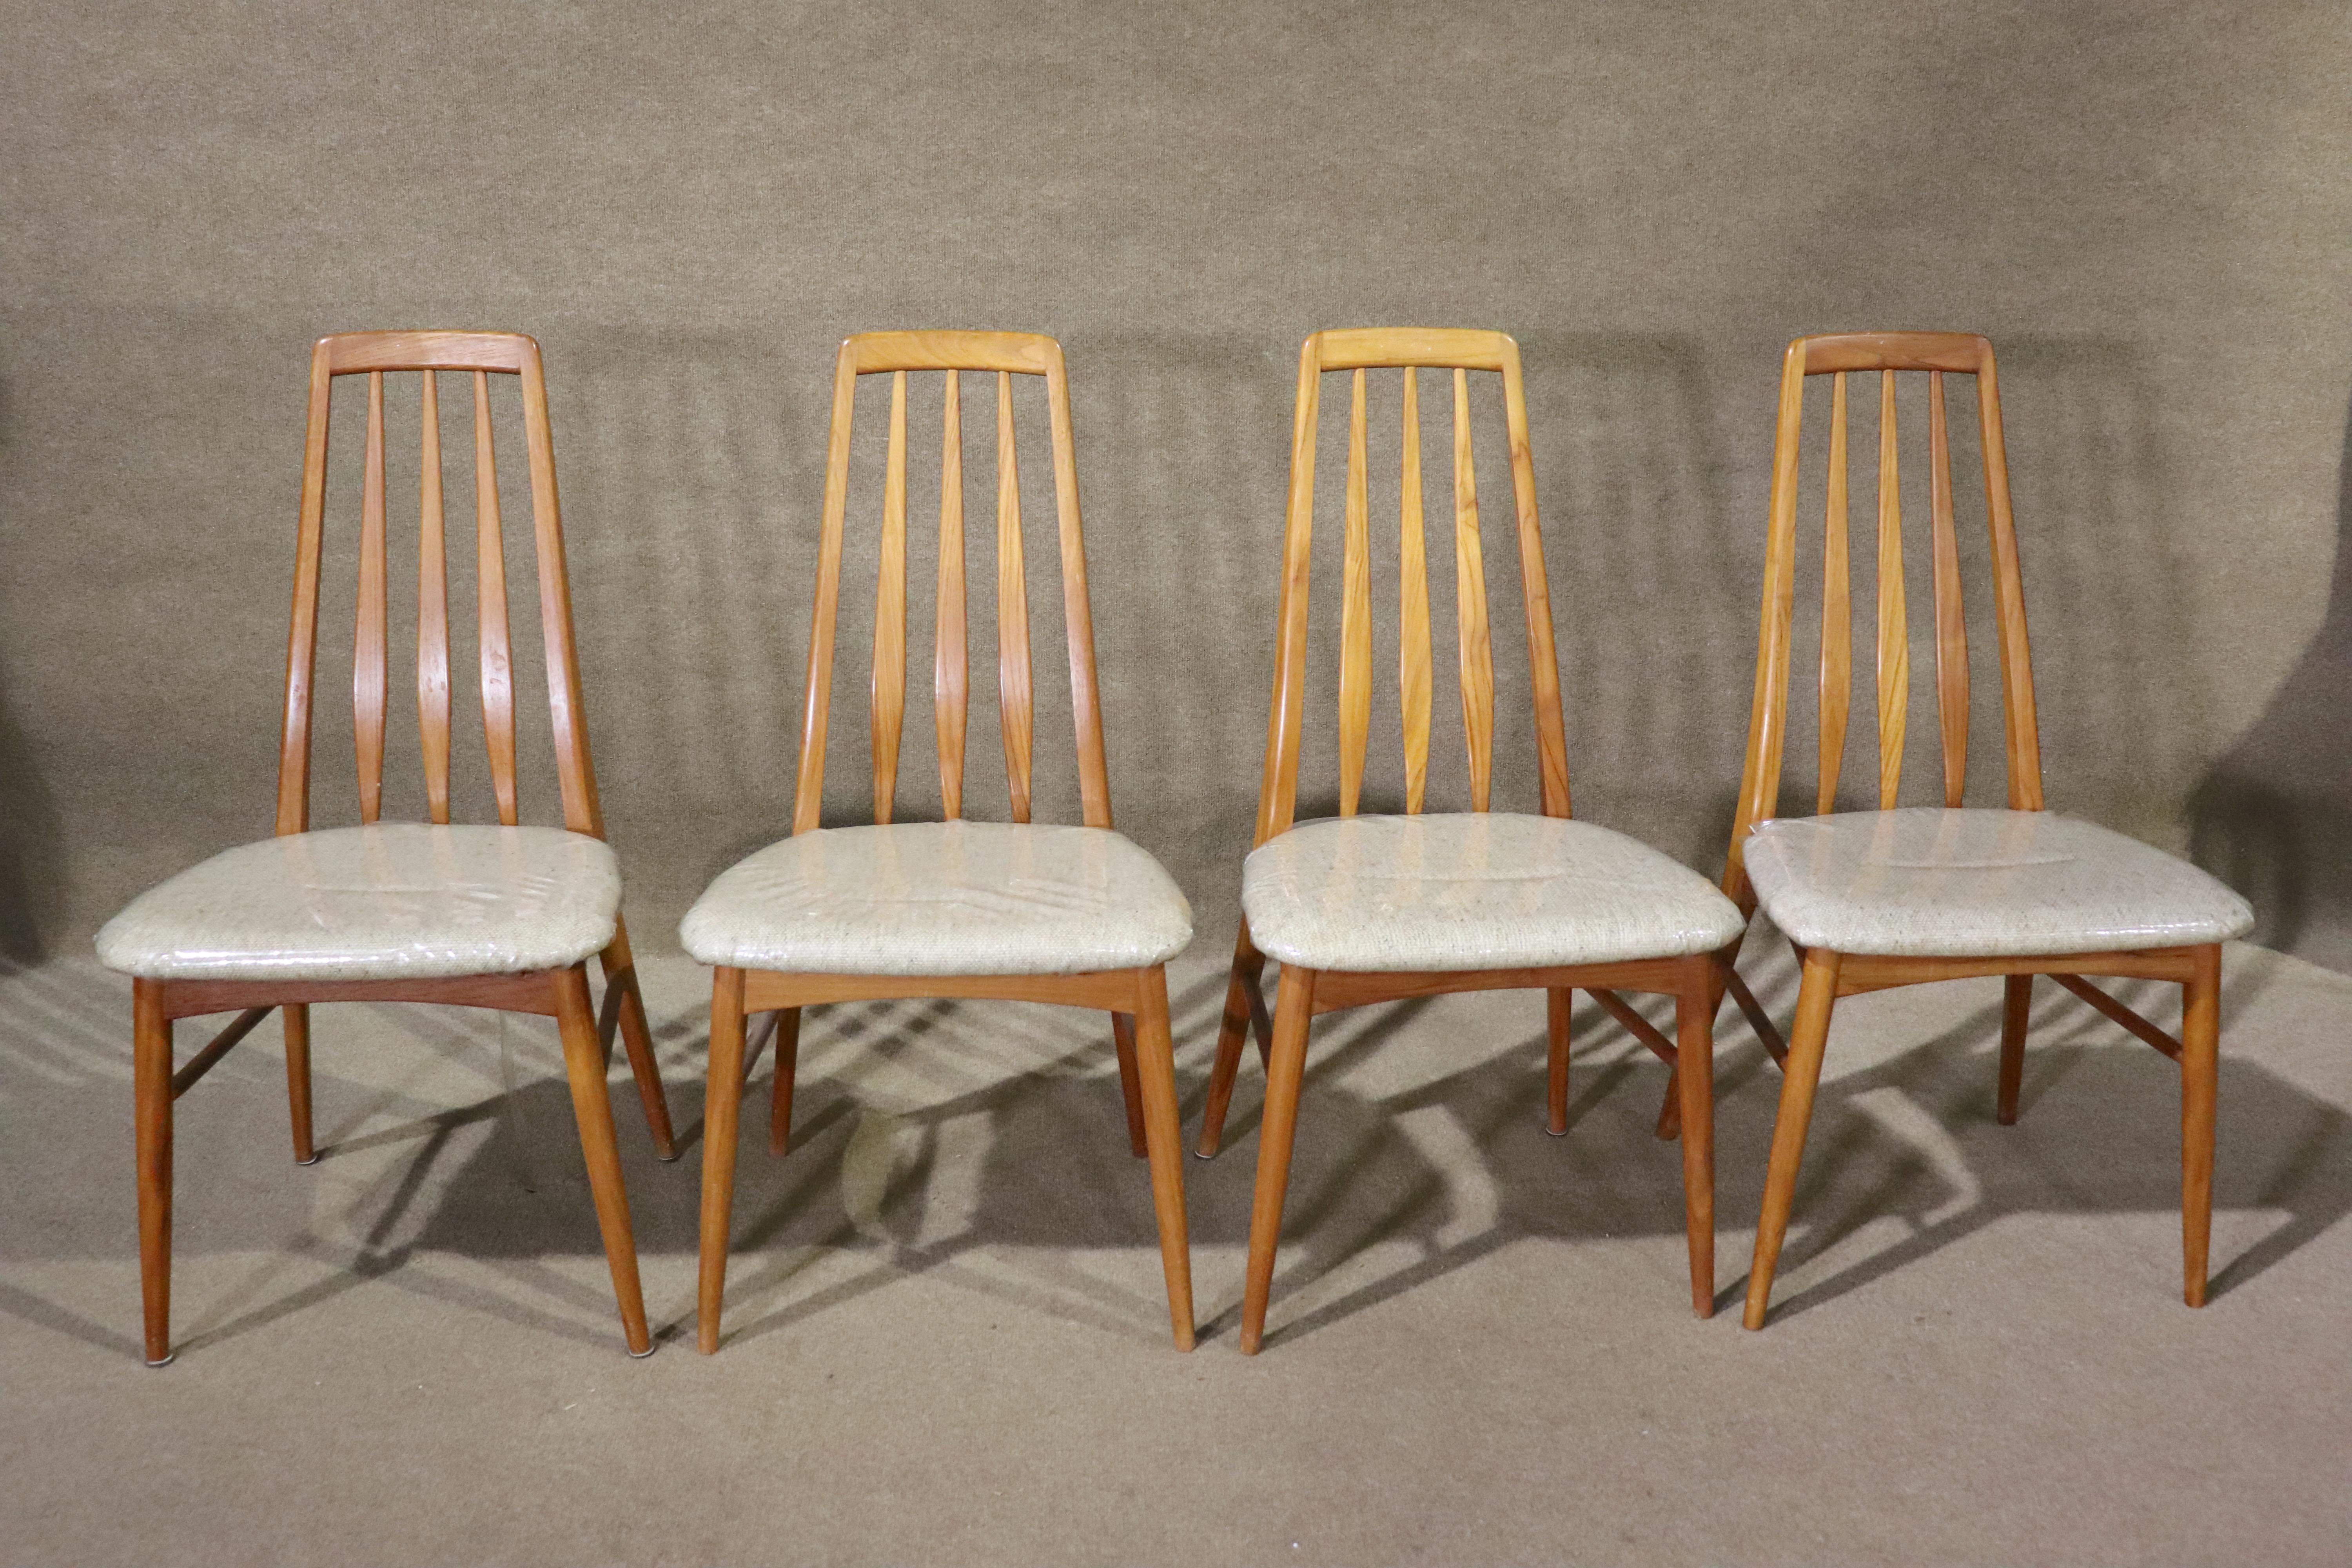 Set of six Danish made tall back dining chairs by Koefoeds Hornslet. Two arm chairs and four side chairs with smooth teak wood frames.
Side chairs: 37.5h, 19w, 21d
Armchairs: 37.5h, 20.75w, 21h
Please confirm location NY or NJ